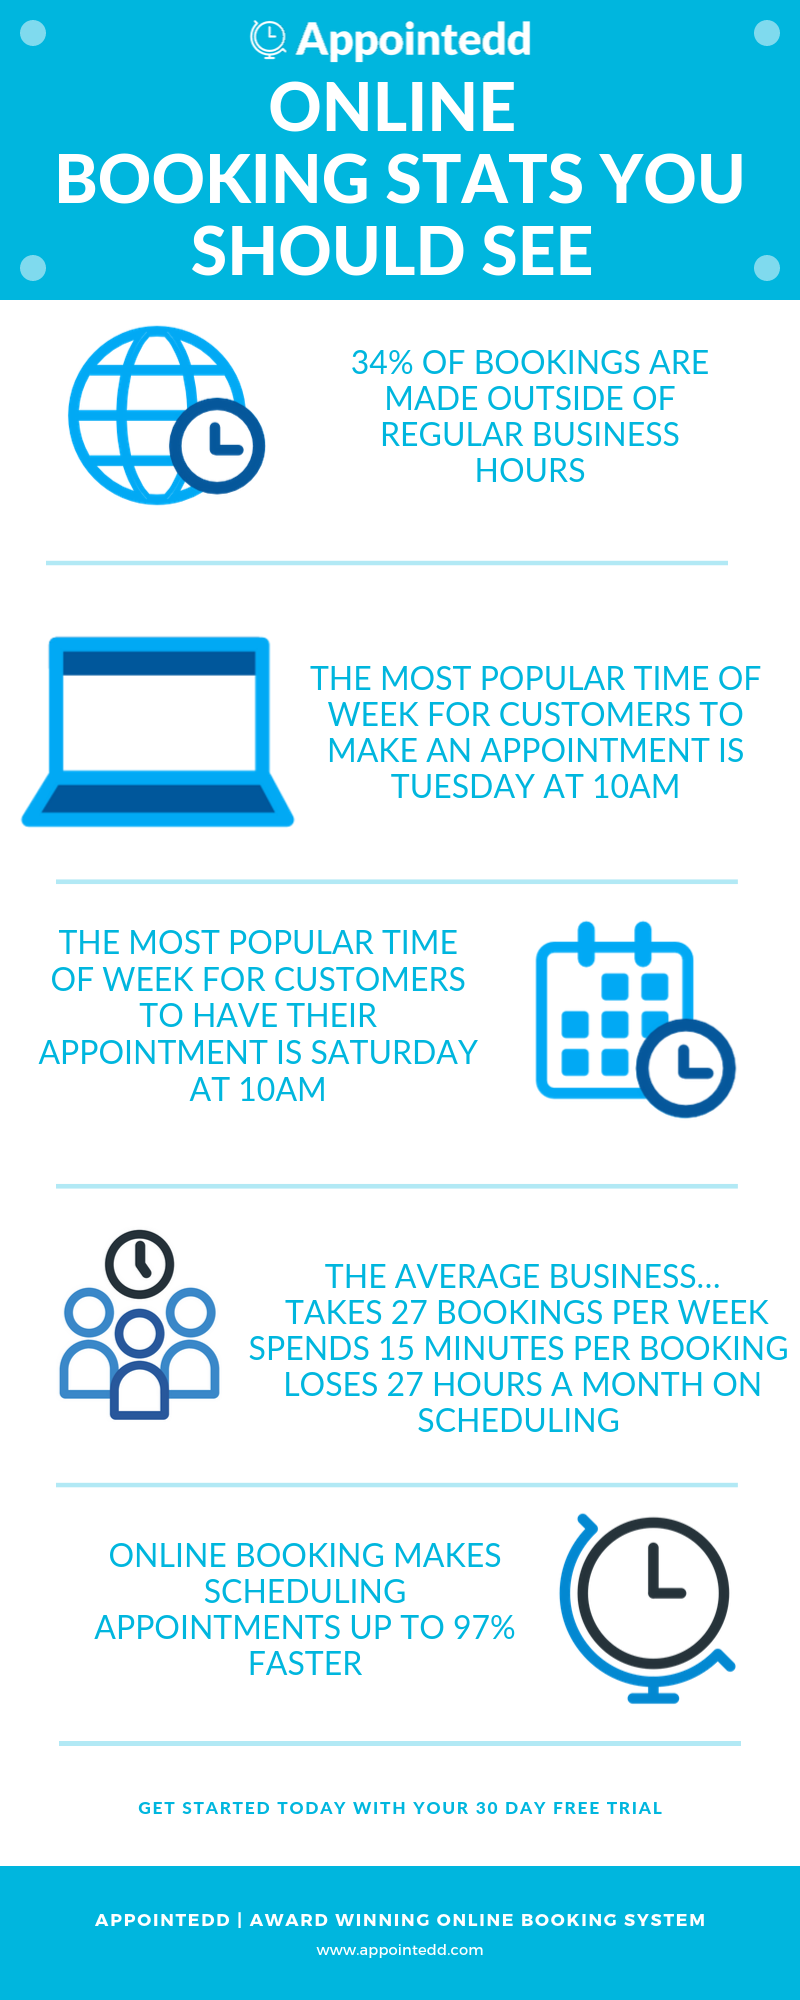 Online booking stats you should see infographic